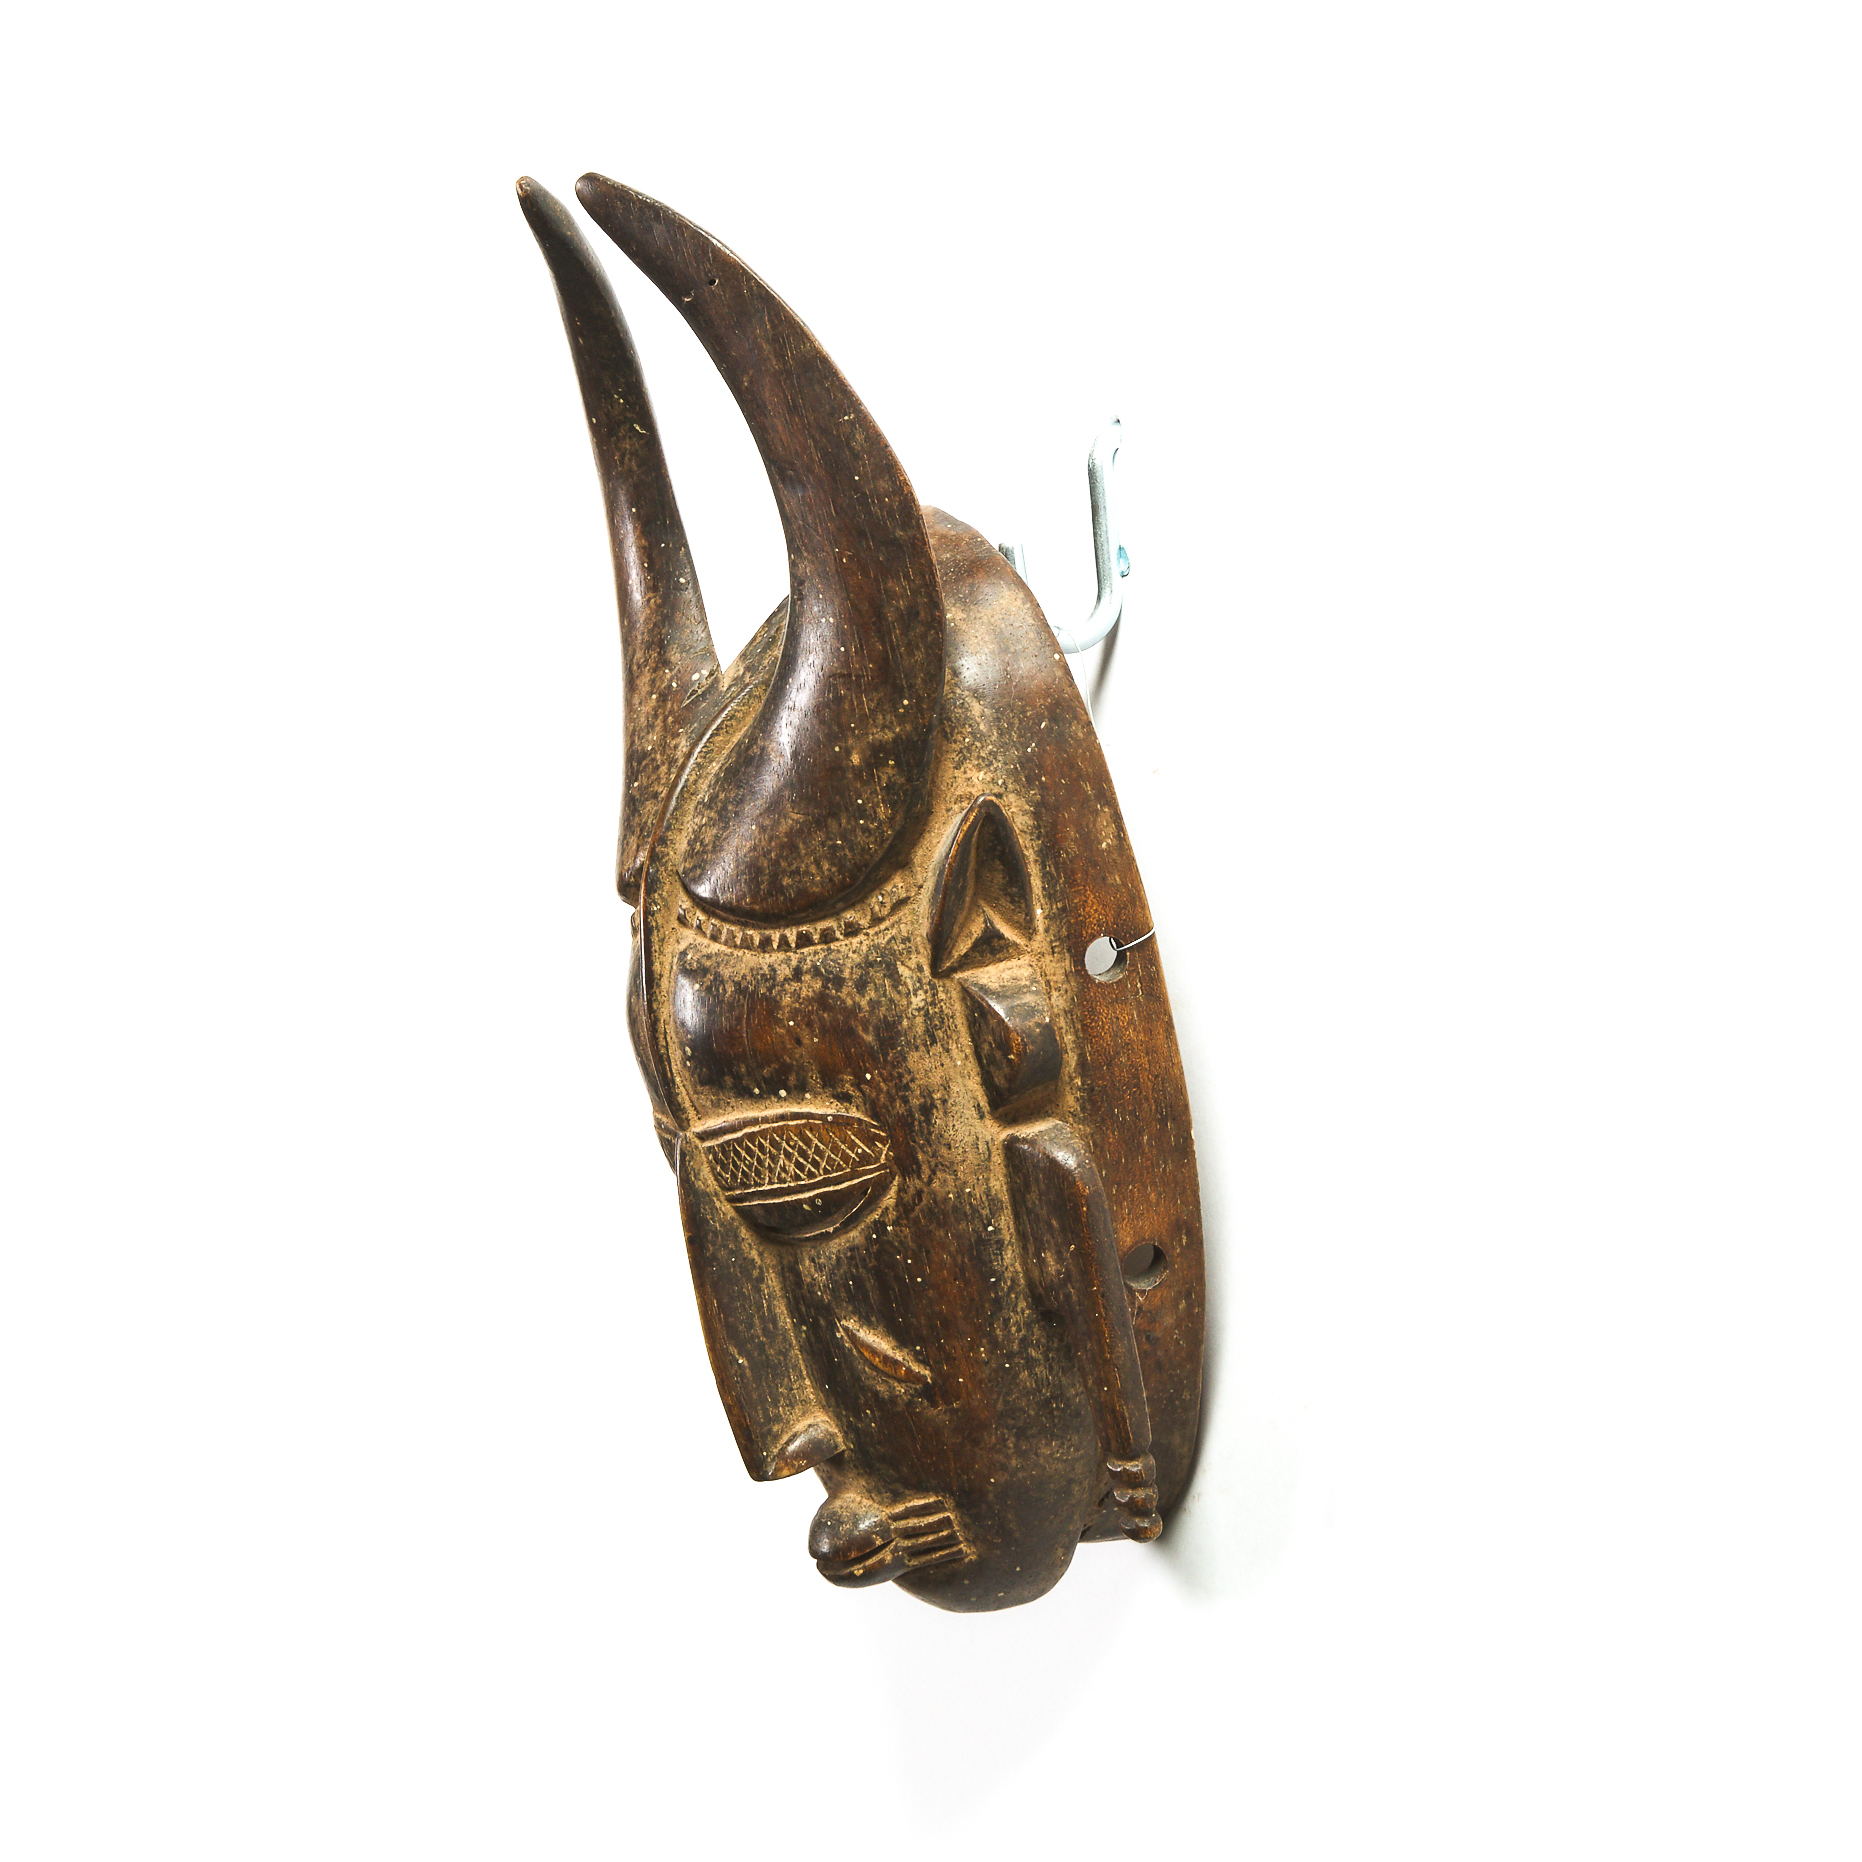 Senufo Kpelie Mask, South Africa, mid to late 20th century